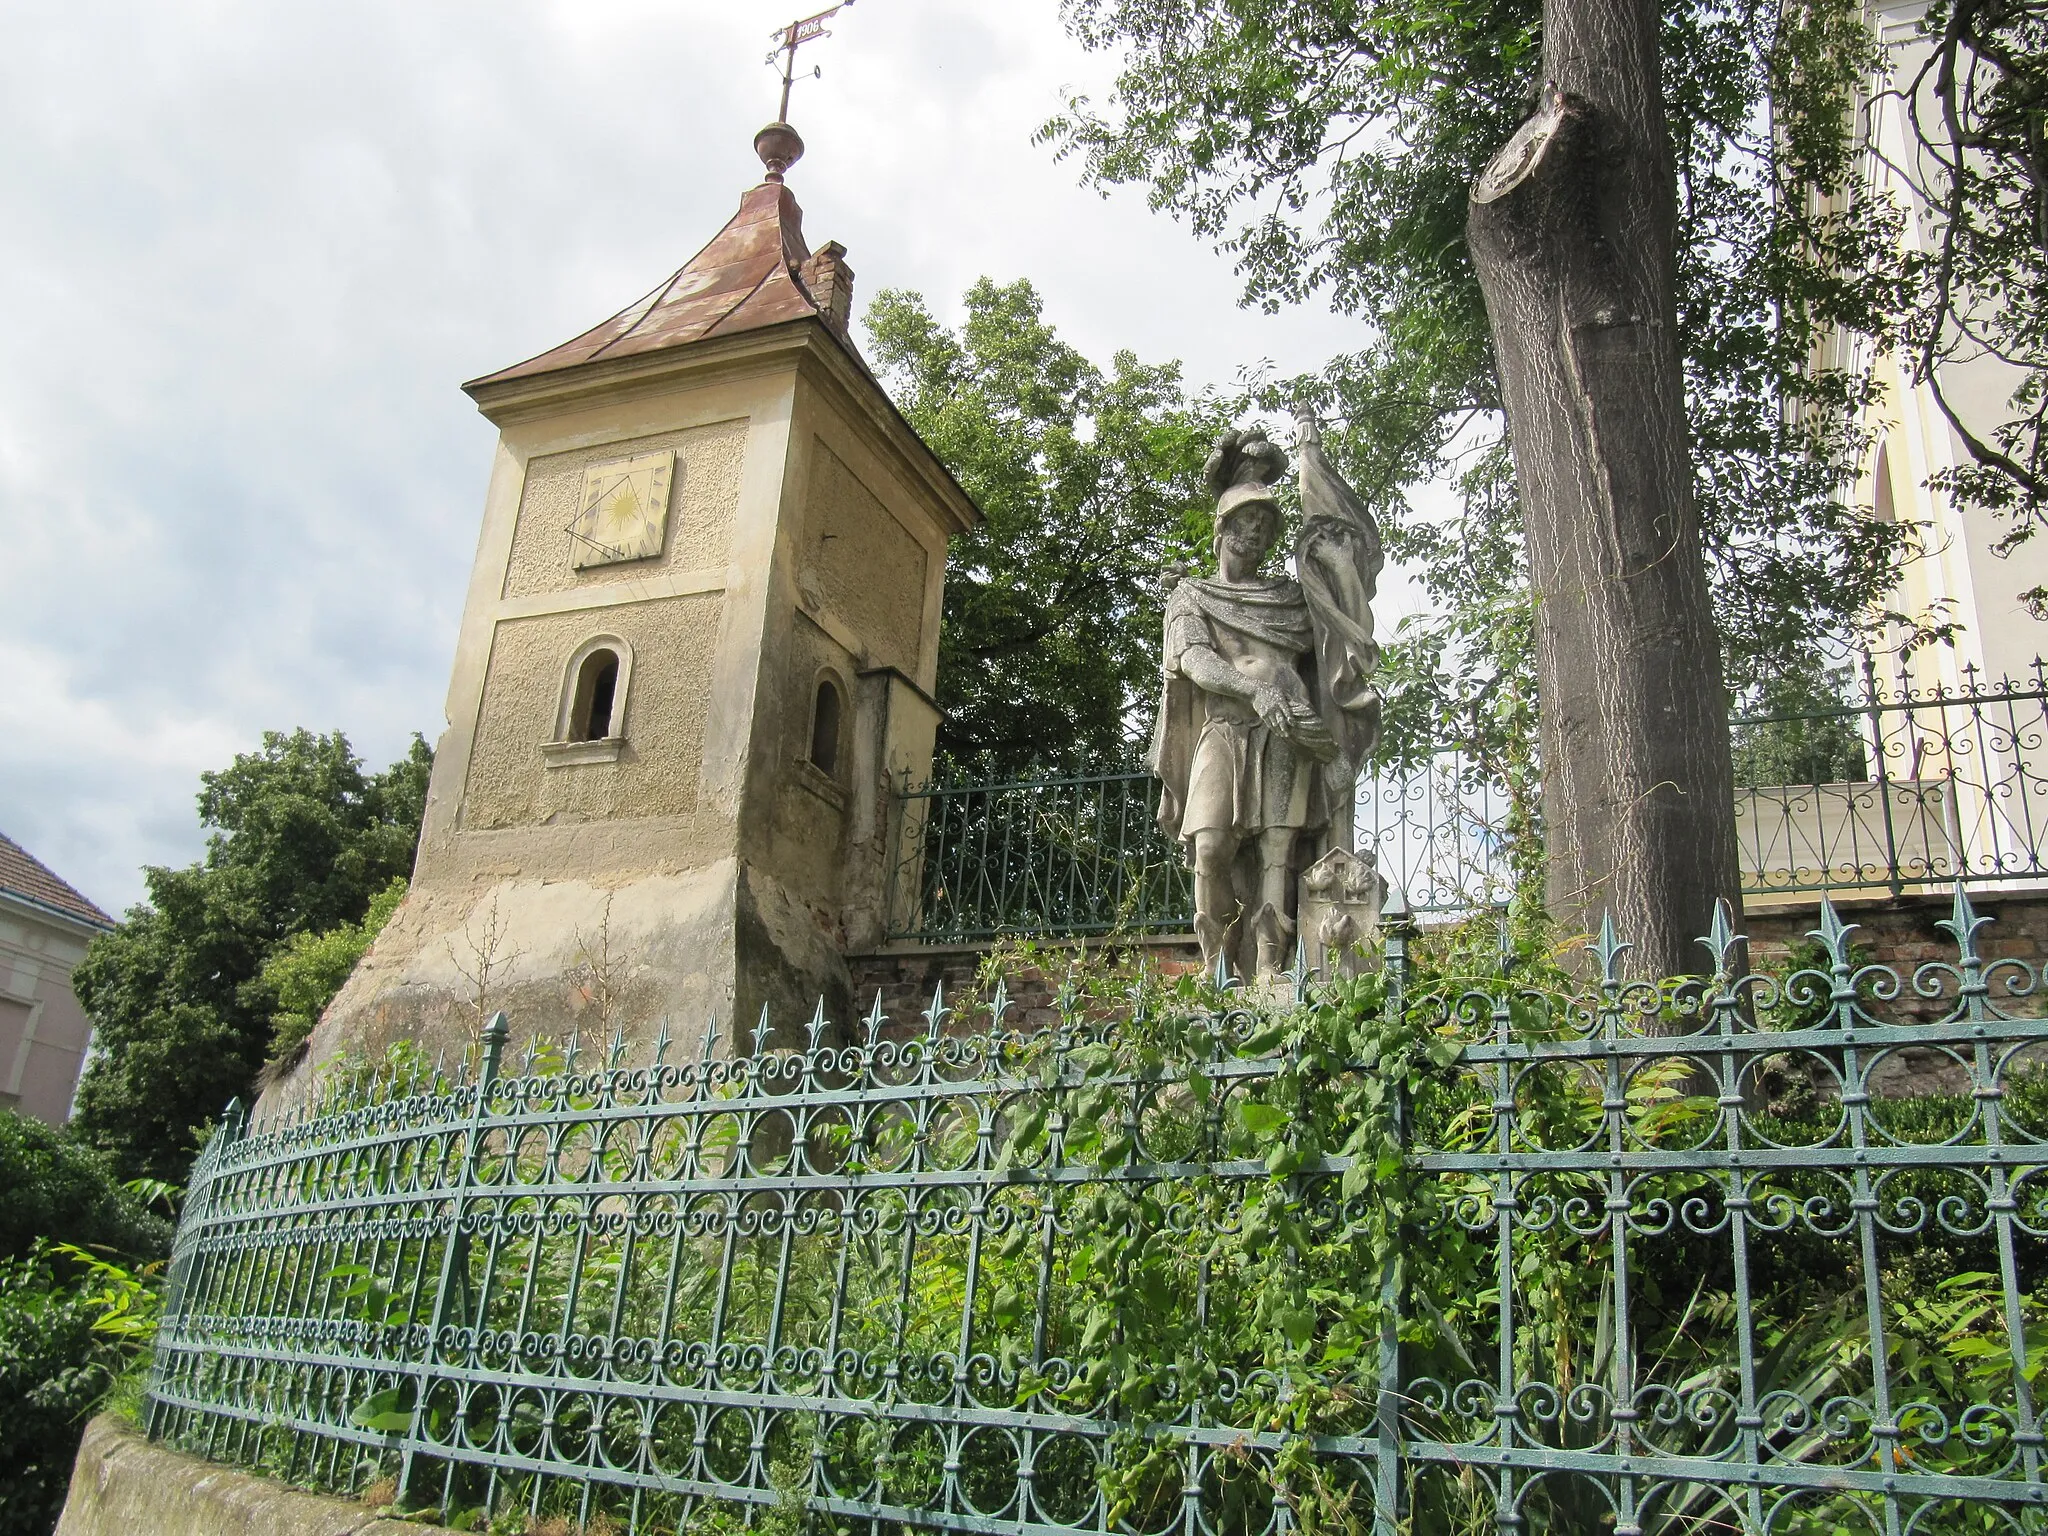 Photo showing: Dyjákovice in Znojmo District, Czech Republic. Turret in the wall of the church with a sundial and statue of St. Florian.